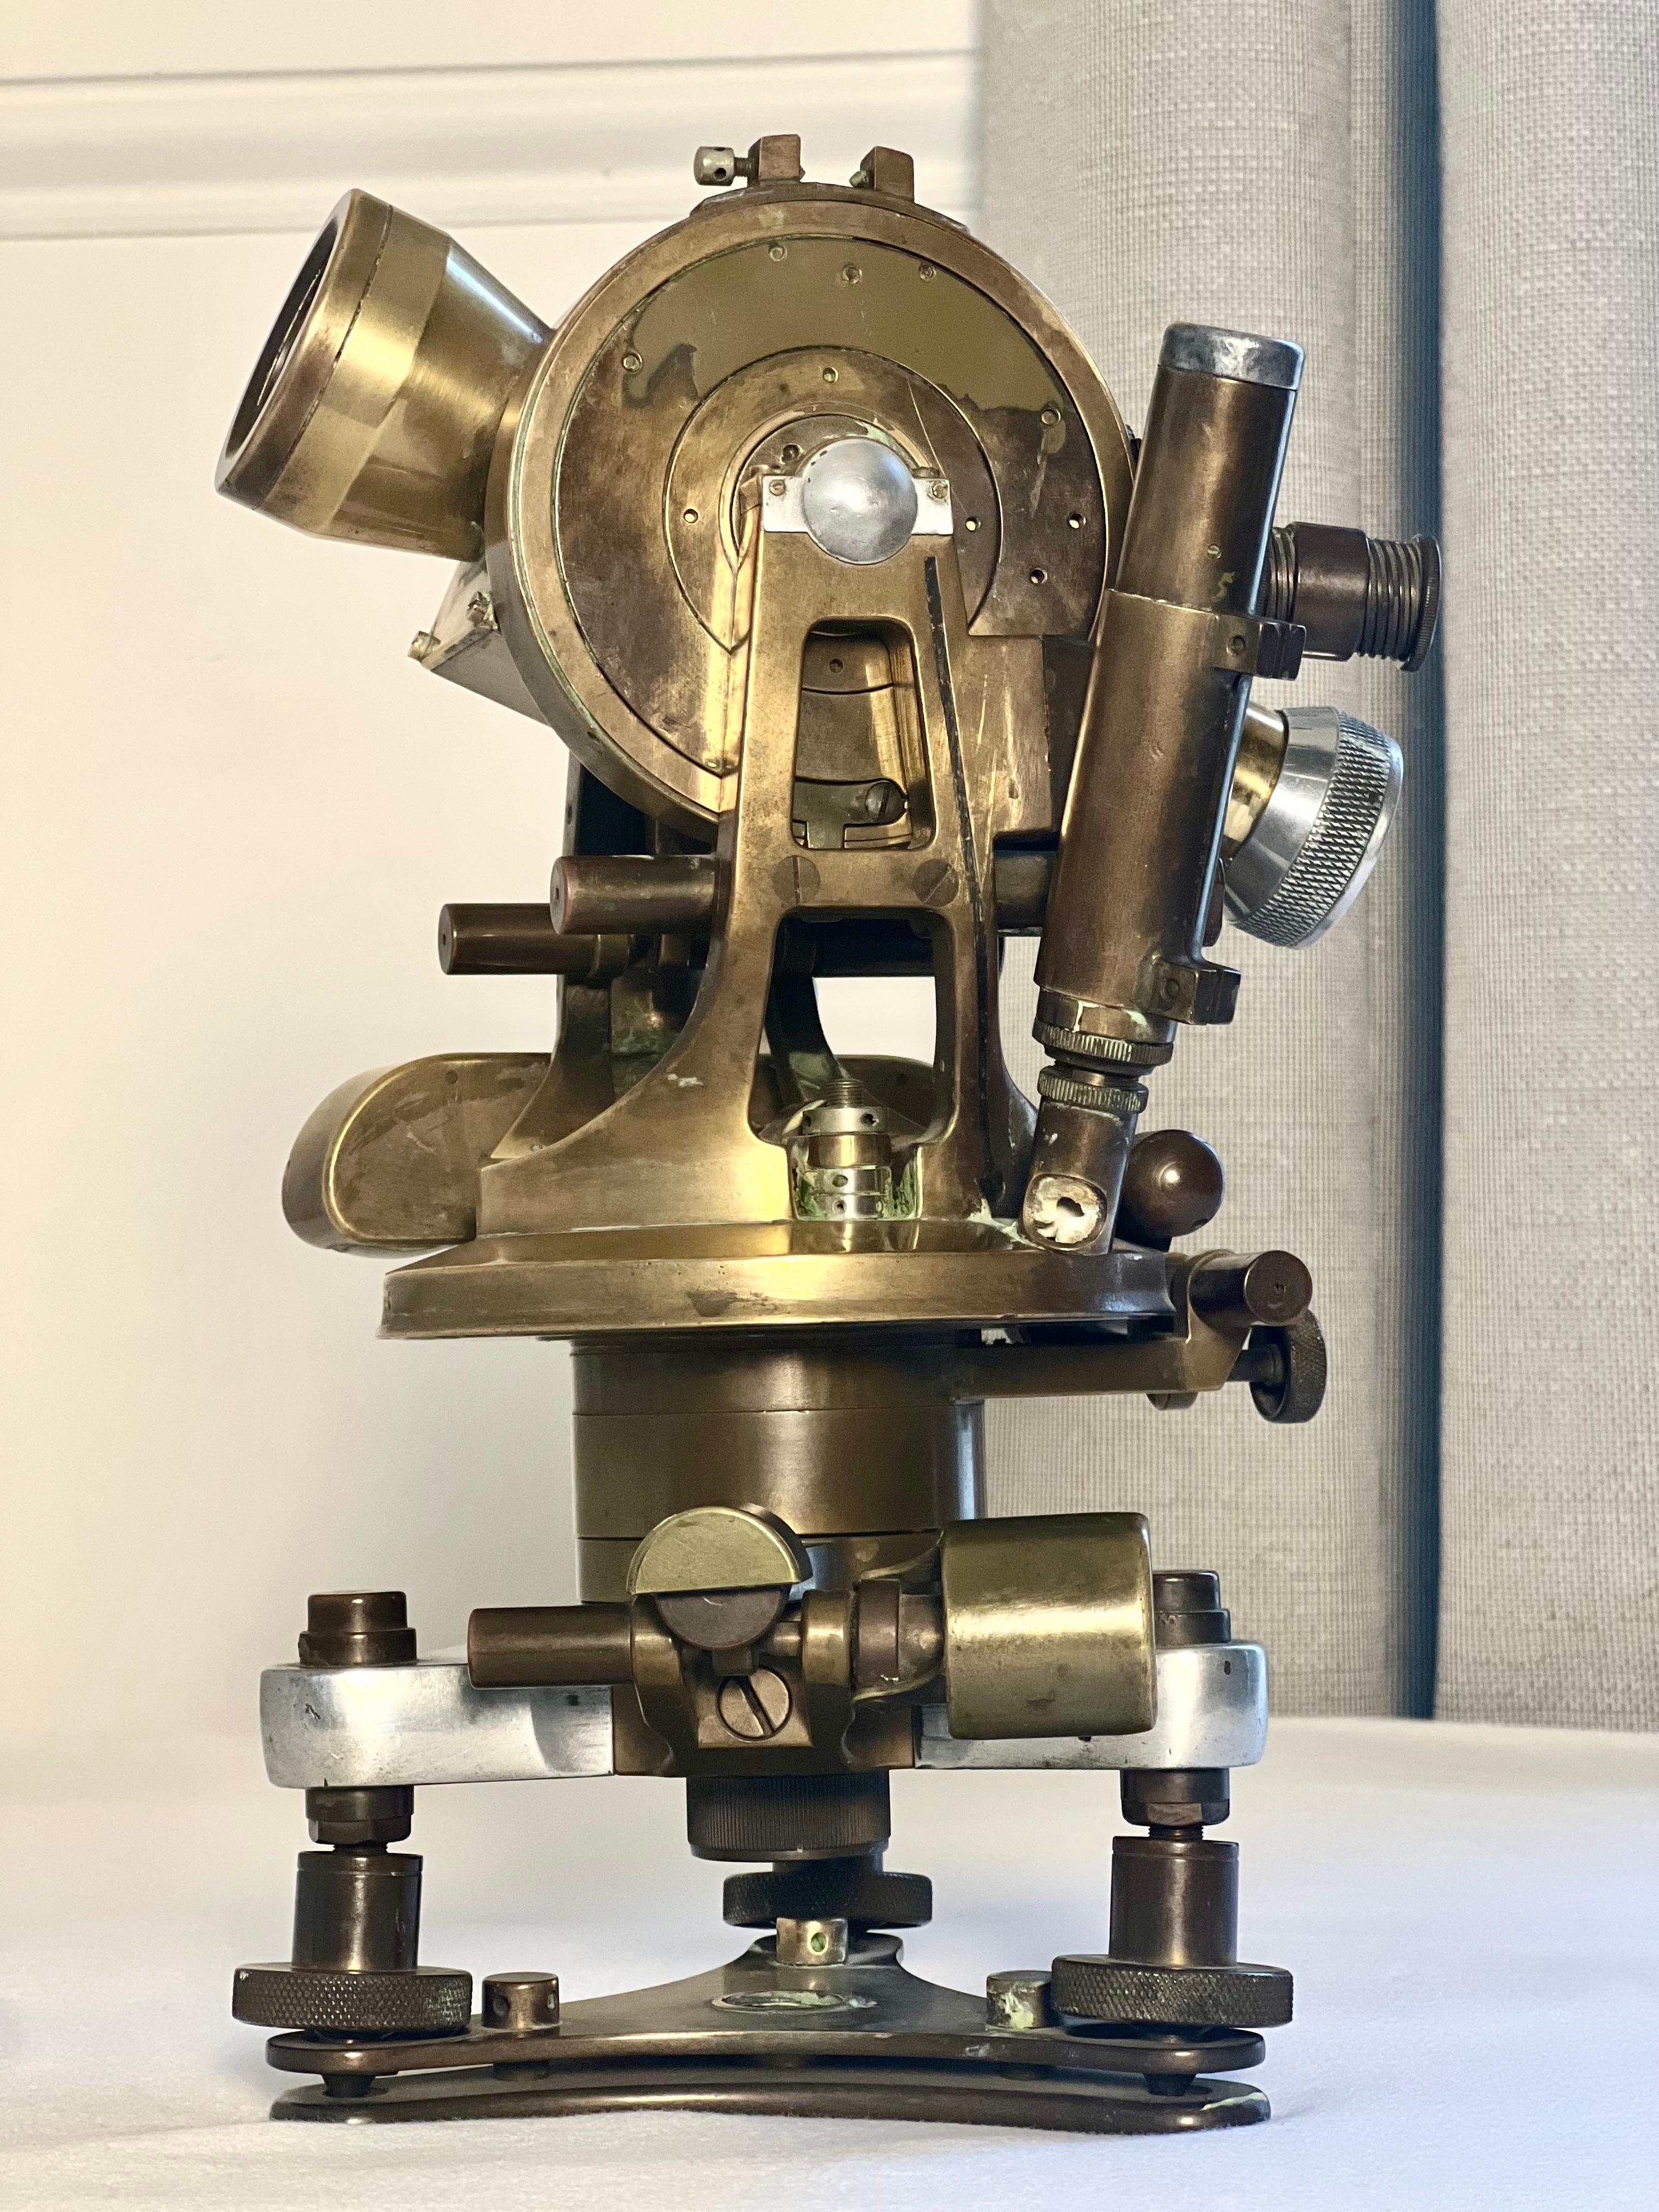 Field artillery theodolite by Srb & Stys of Prague, signed, 1930s.

Spectacular precision optical instrument of bronze, brass and steel utilized by the Czech military for artillery surveying. In 1919, Jaroslav Srb and Josef Stys founded a plant of